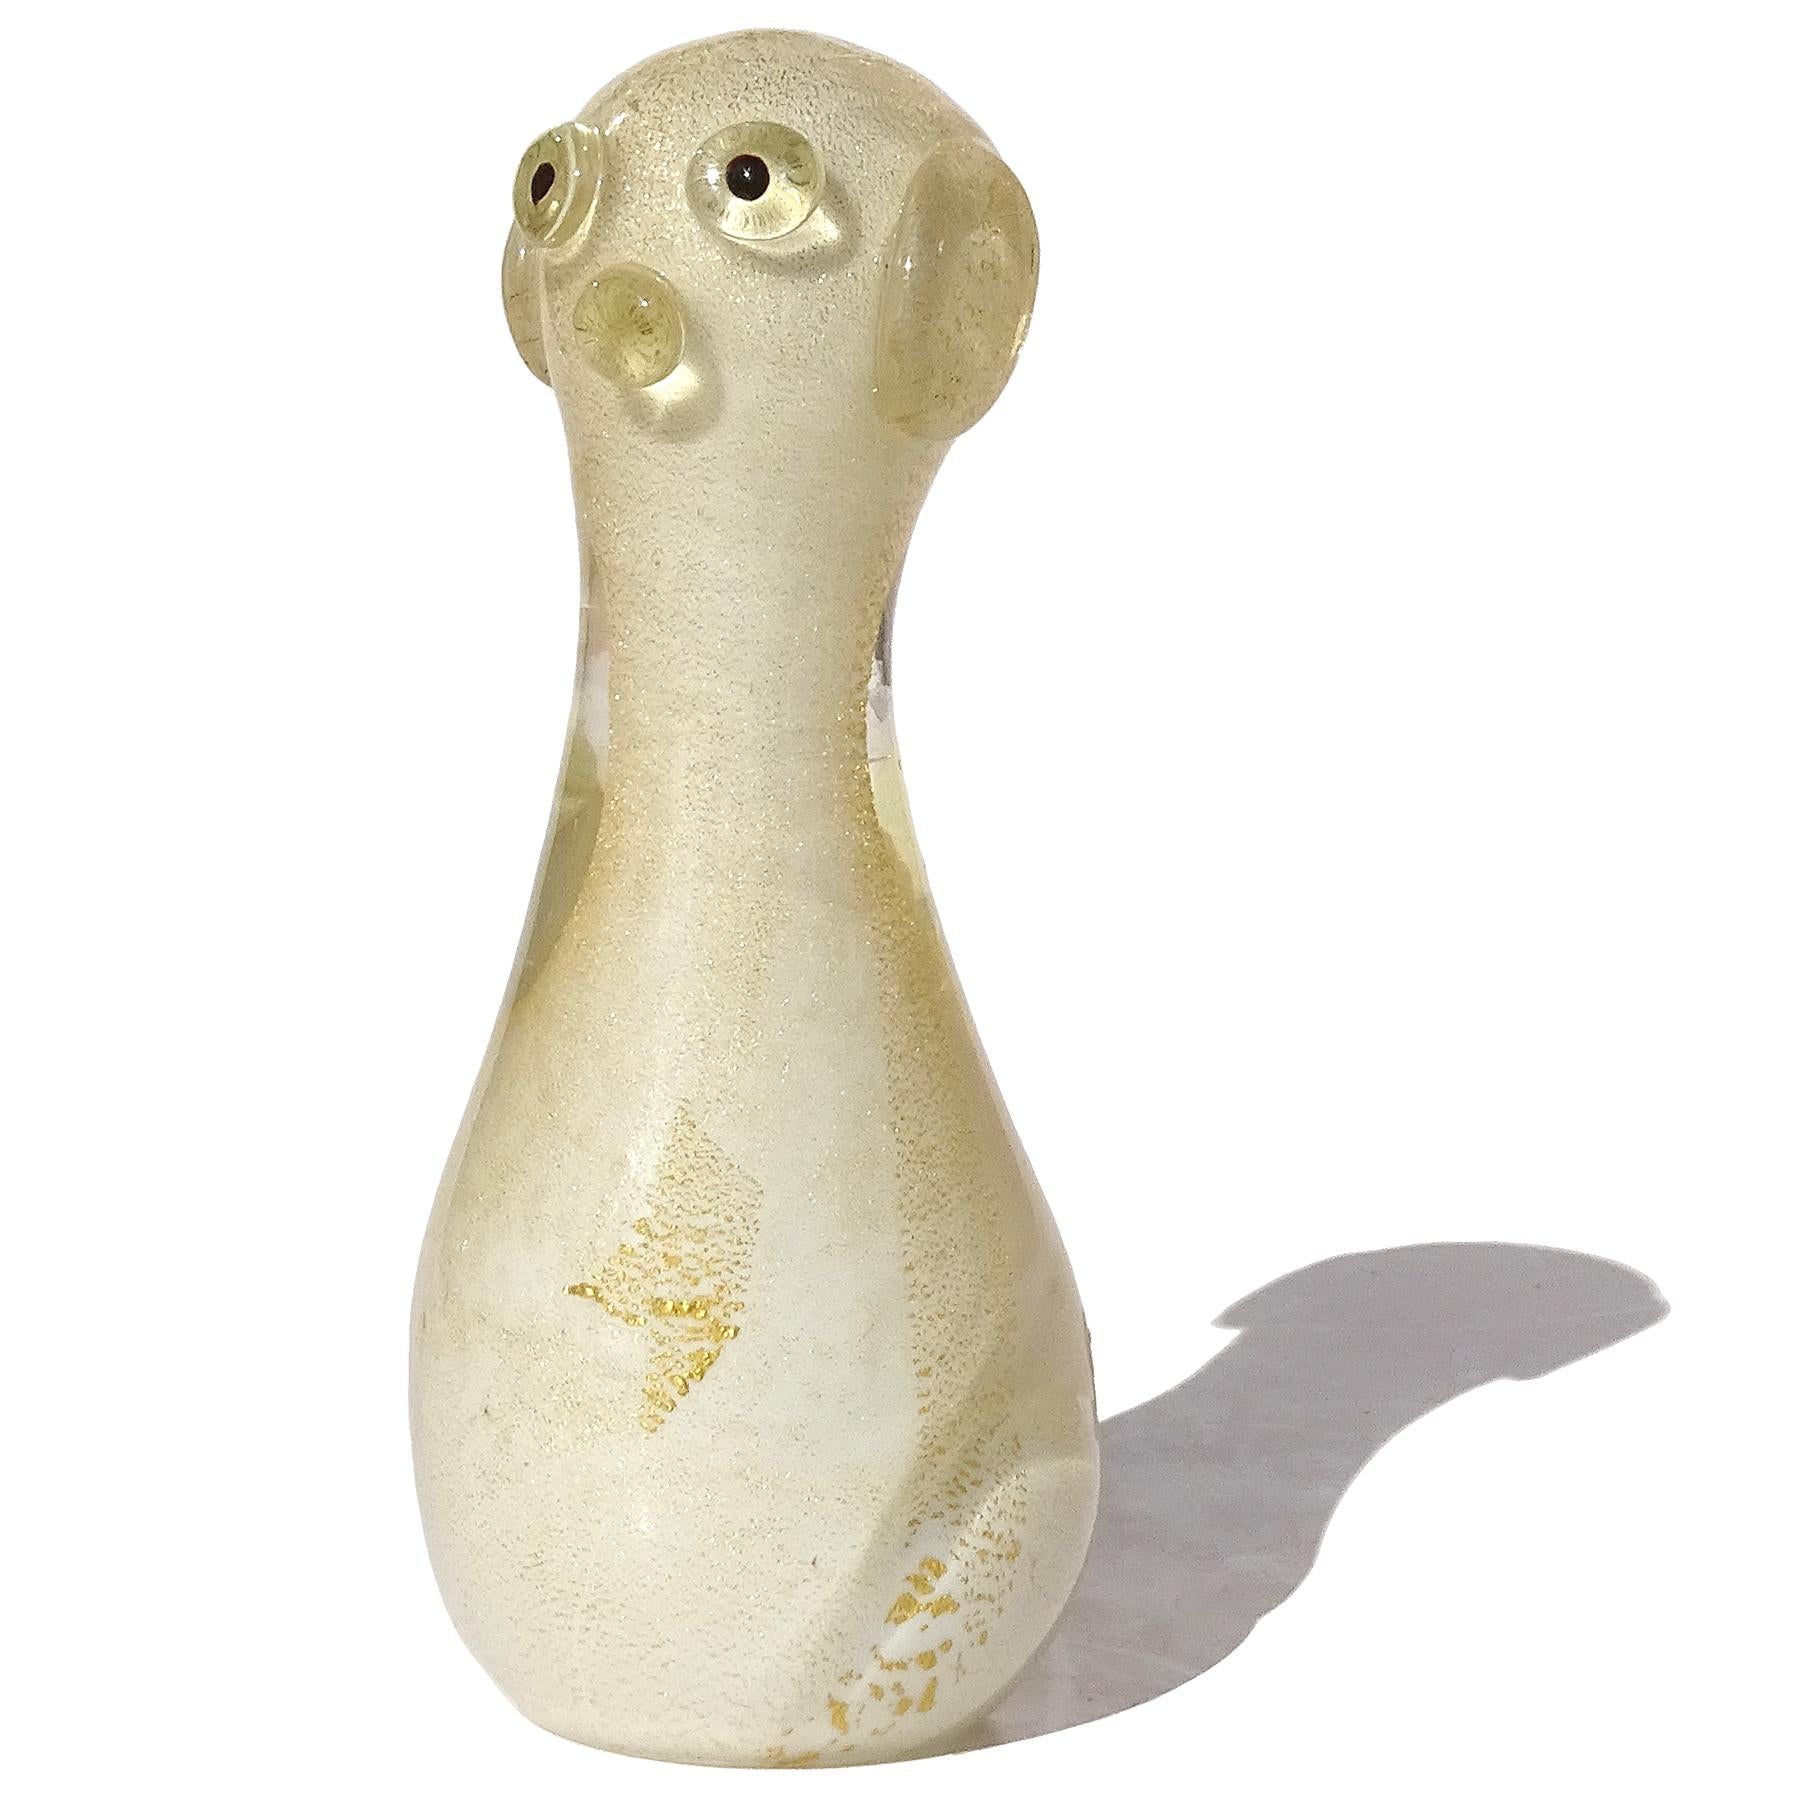 Beautiful vintage Murano hand blown white and gold flecks Italian art glass puppy dog figurine sculpture. Documented to the Seguso Vetri d'Arte company, recently found on their illustrated archives, item number 12990. The little dog is profusely